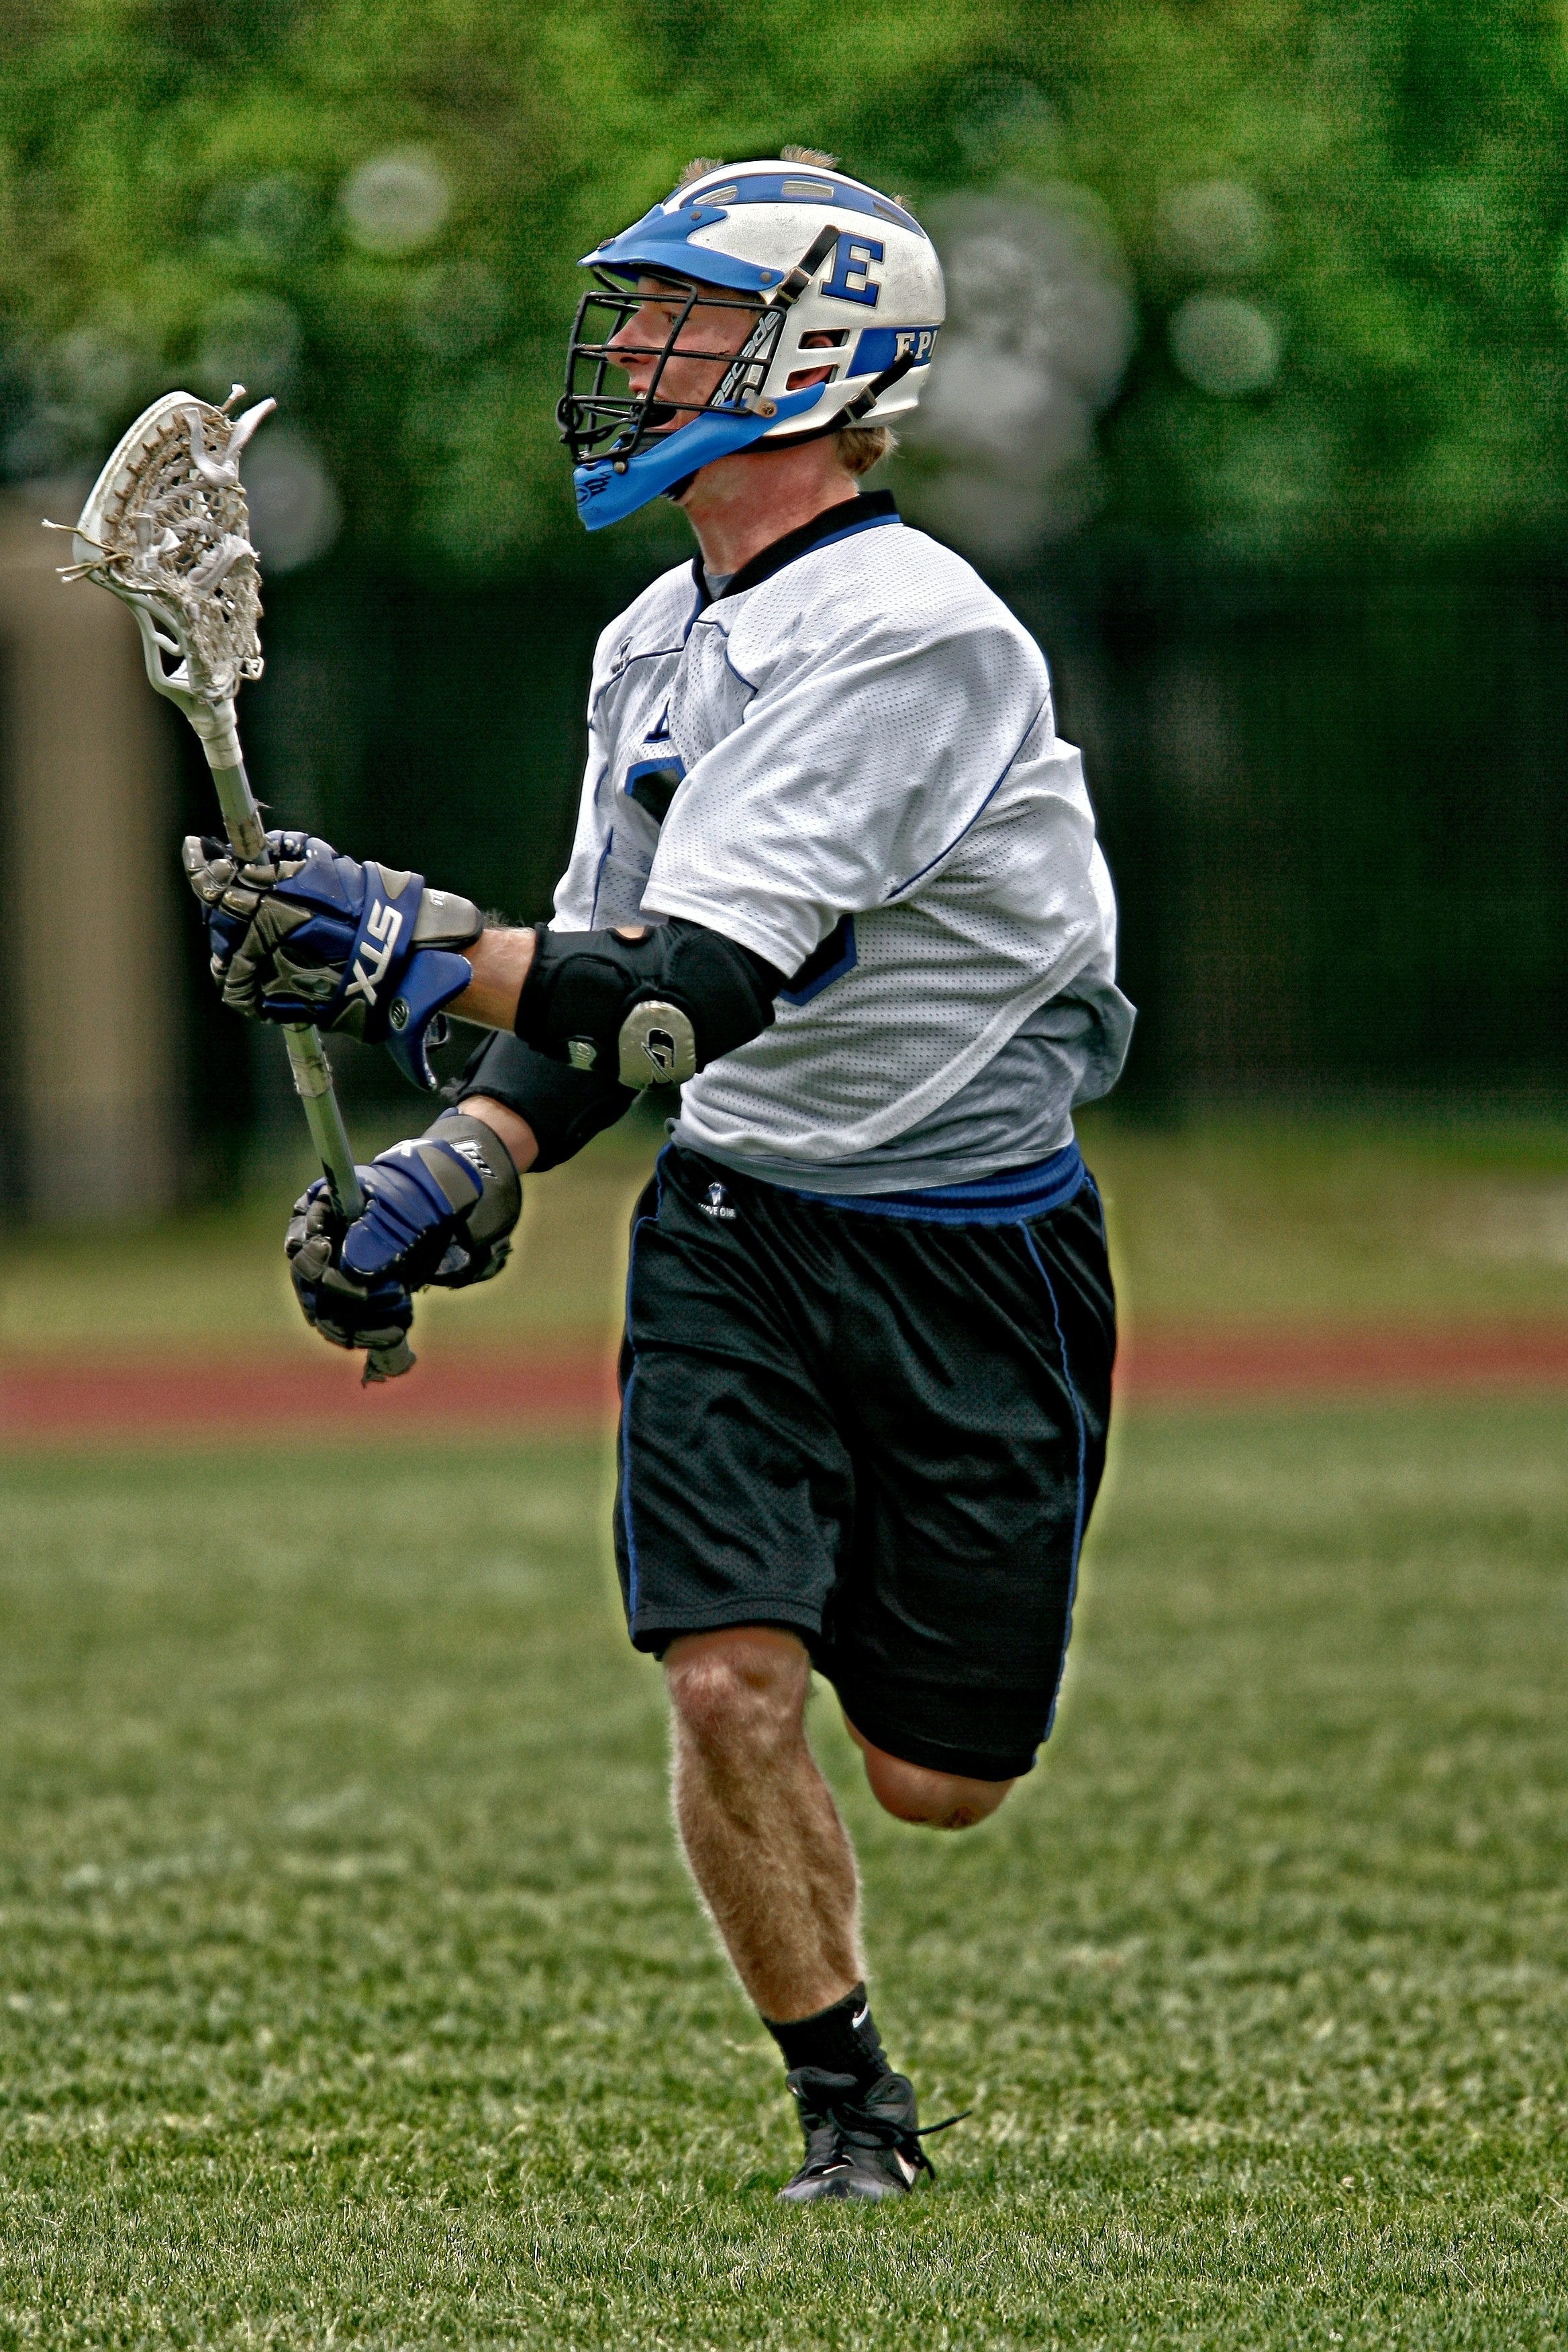 man wearing lacrosse equipment and gear